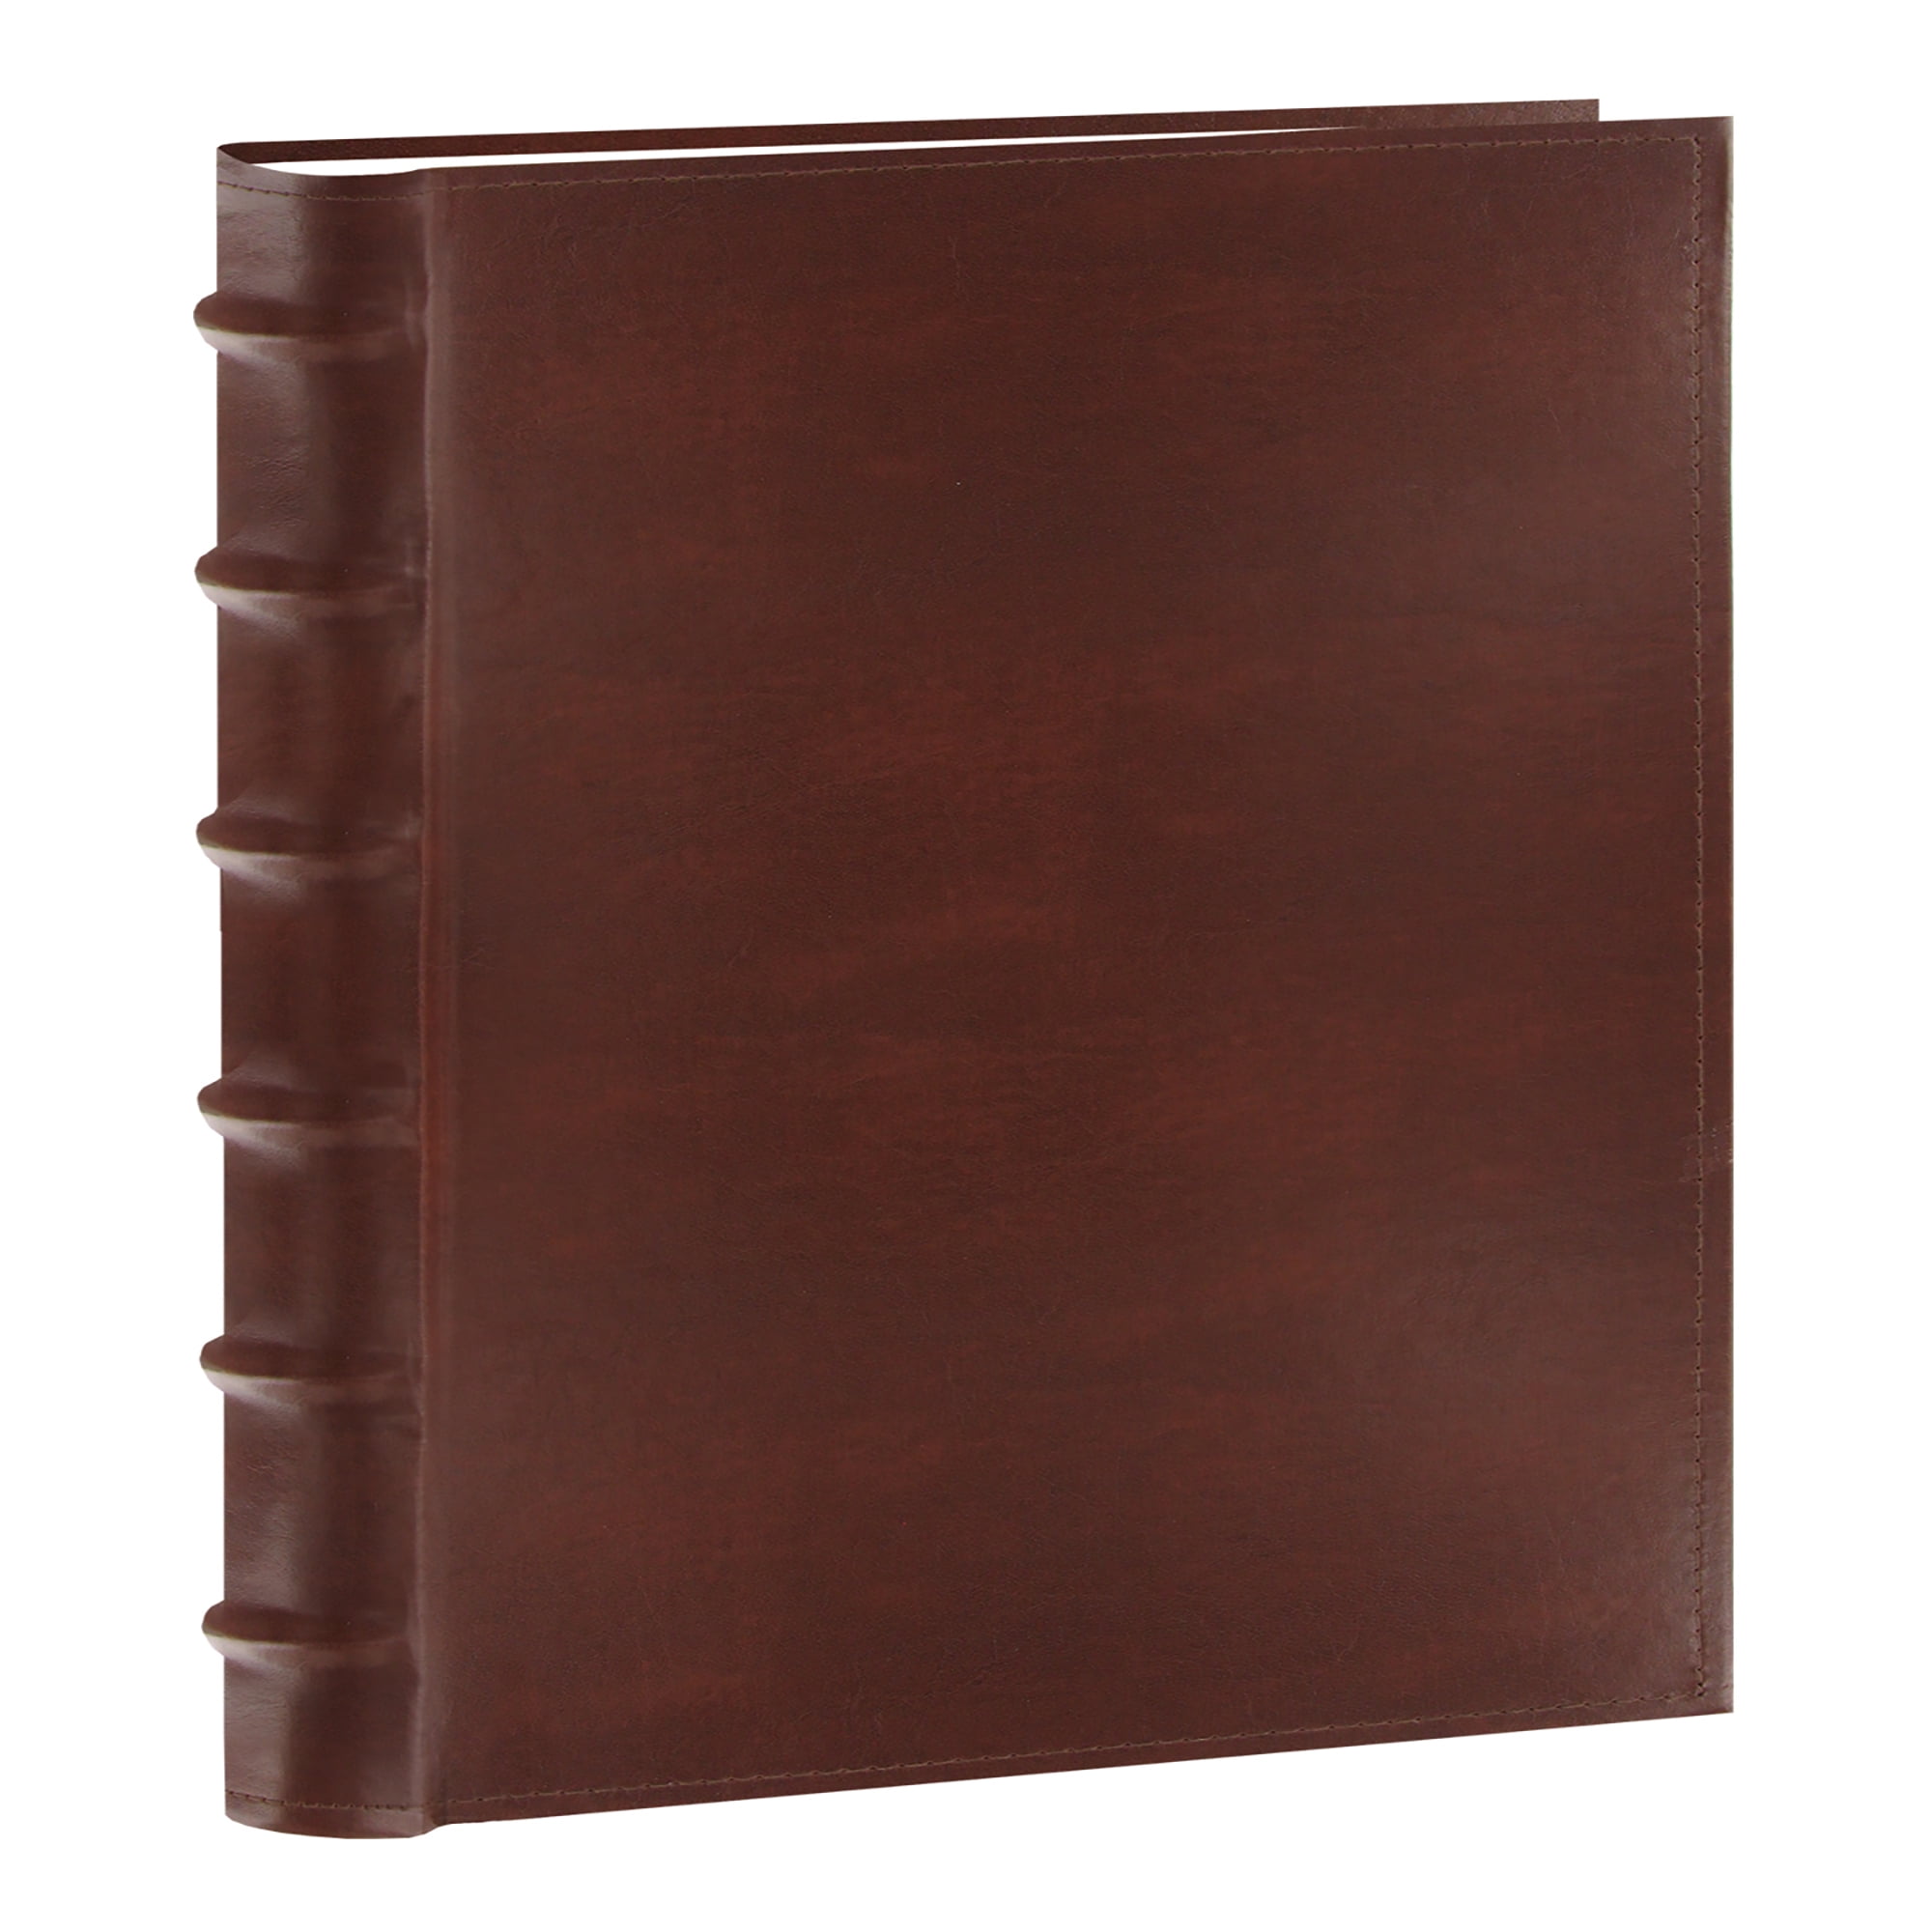 Download Pioneer Photo Albums Leather Bound 500 Pkt 4x6 Photo Album, Brown - Walmart.com - Walmart.com